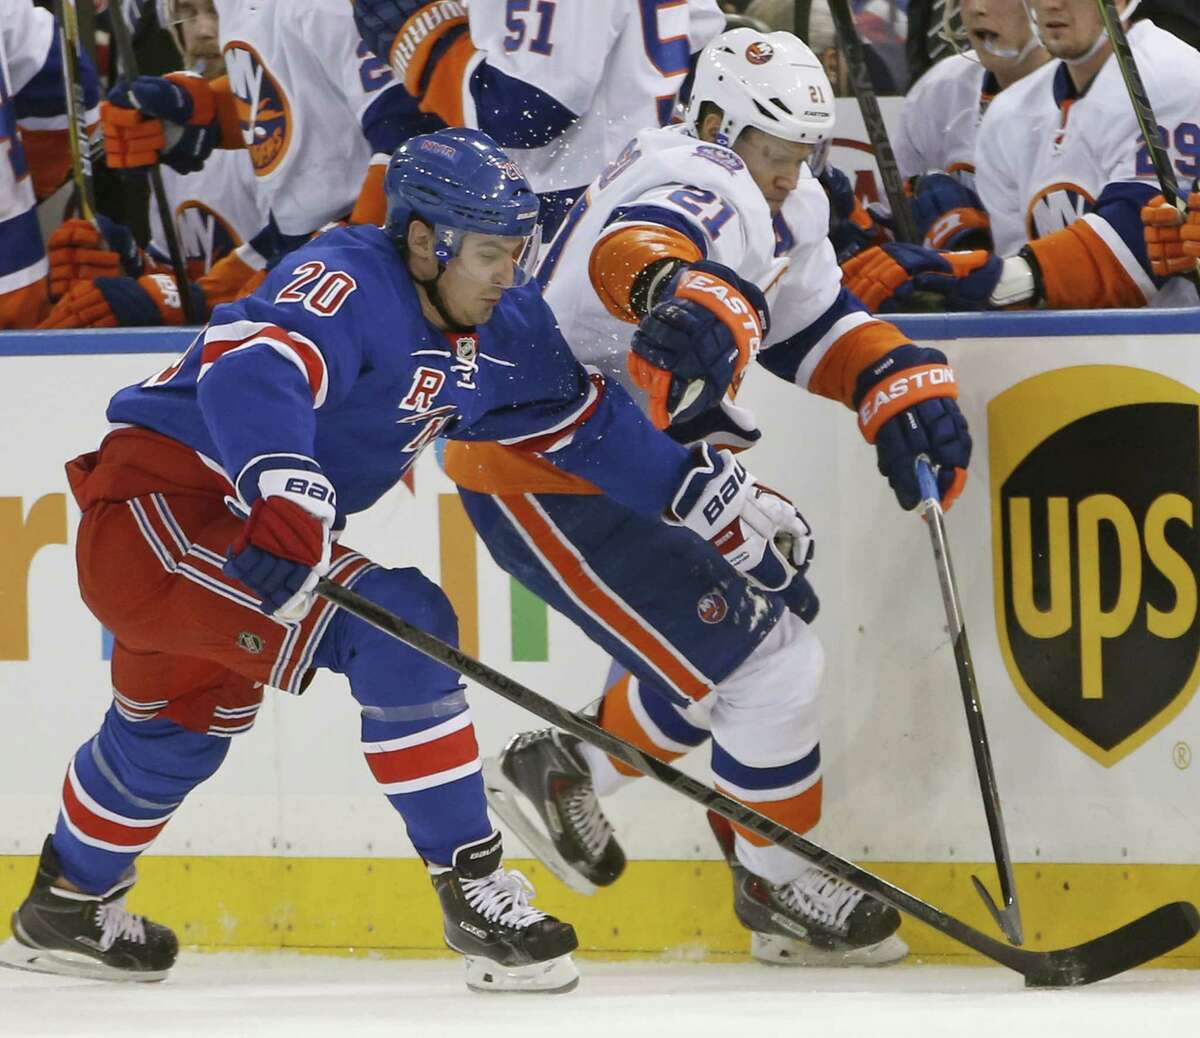 Rangers left wing Chris Kreider (20) fends off New York Islanders right wing Kyle Okposo (21) during a Jan. 13 game at Madison Square Garden in New York.